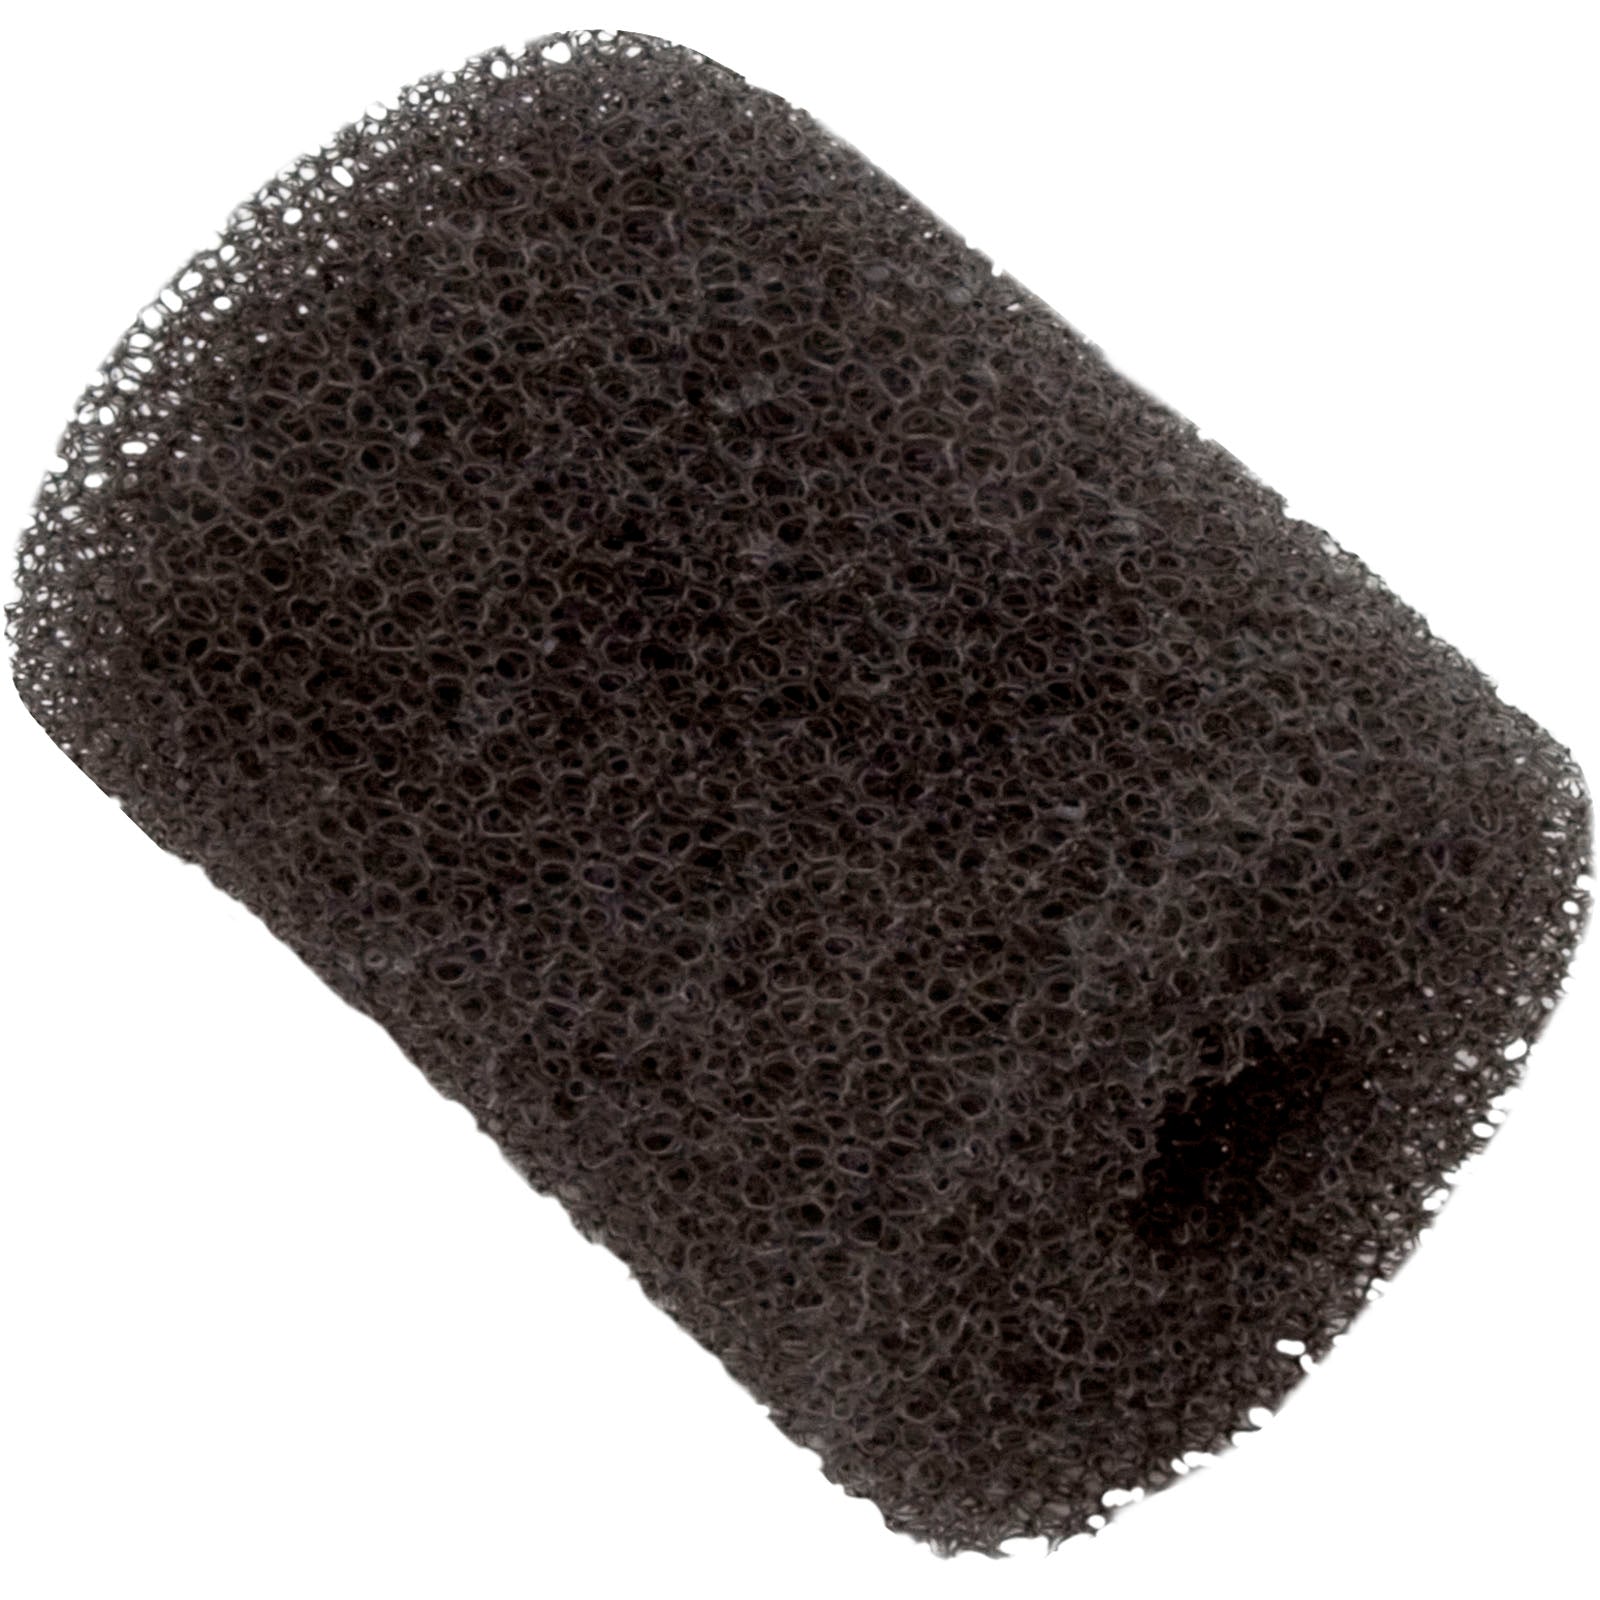 Zodiac Polaris 9-100-3105 Sweep Hose Scrubber for 280/360/380, 280 TankTrax Pool Cleaners